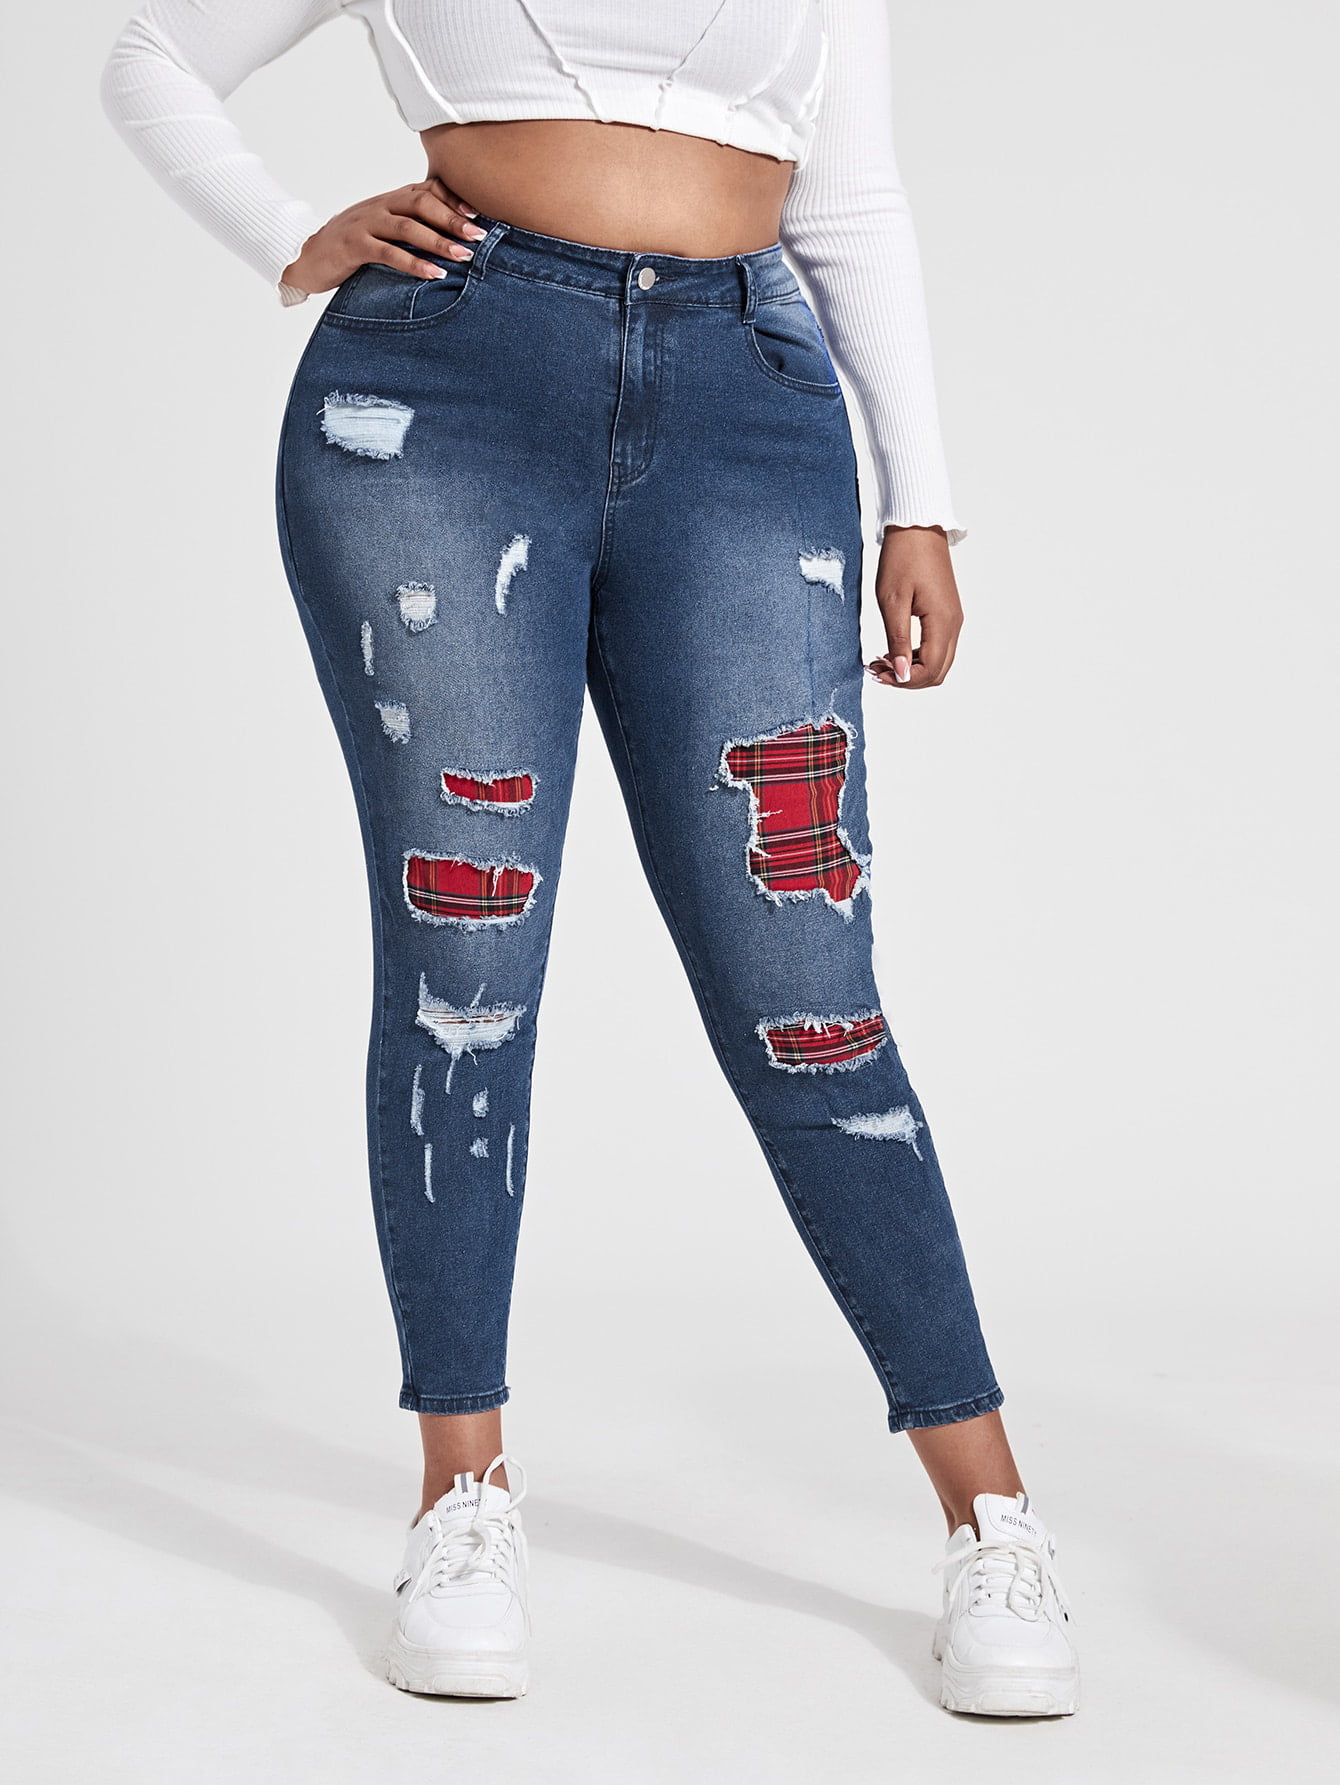 TodTan Womens Ripped Skinny Jeans Hight Waisted Stretch Distressed Denim Pants